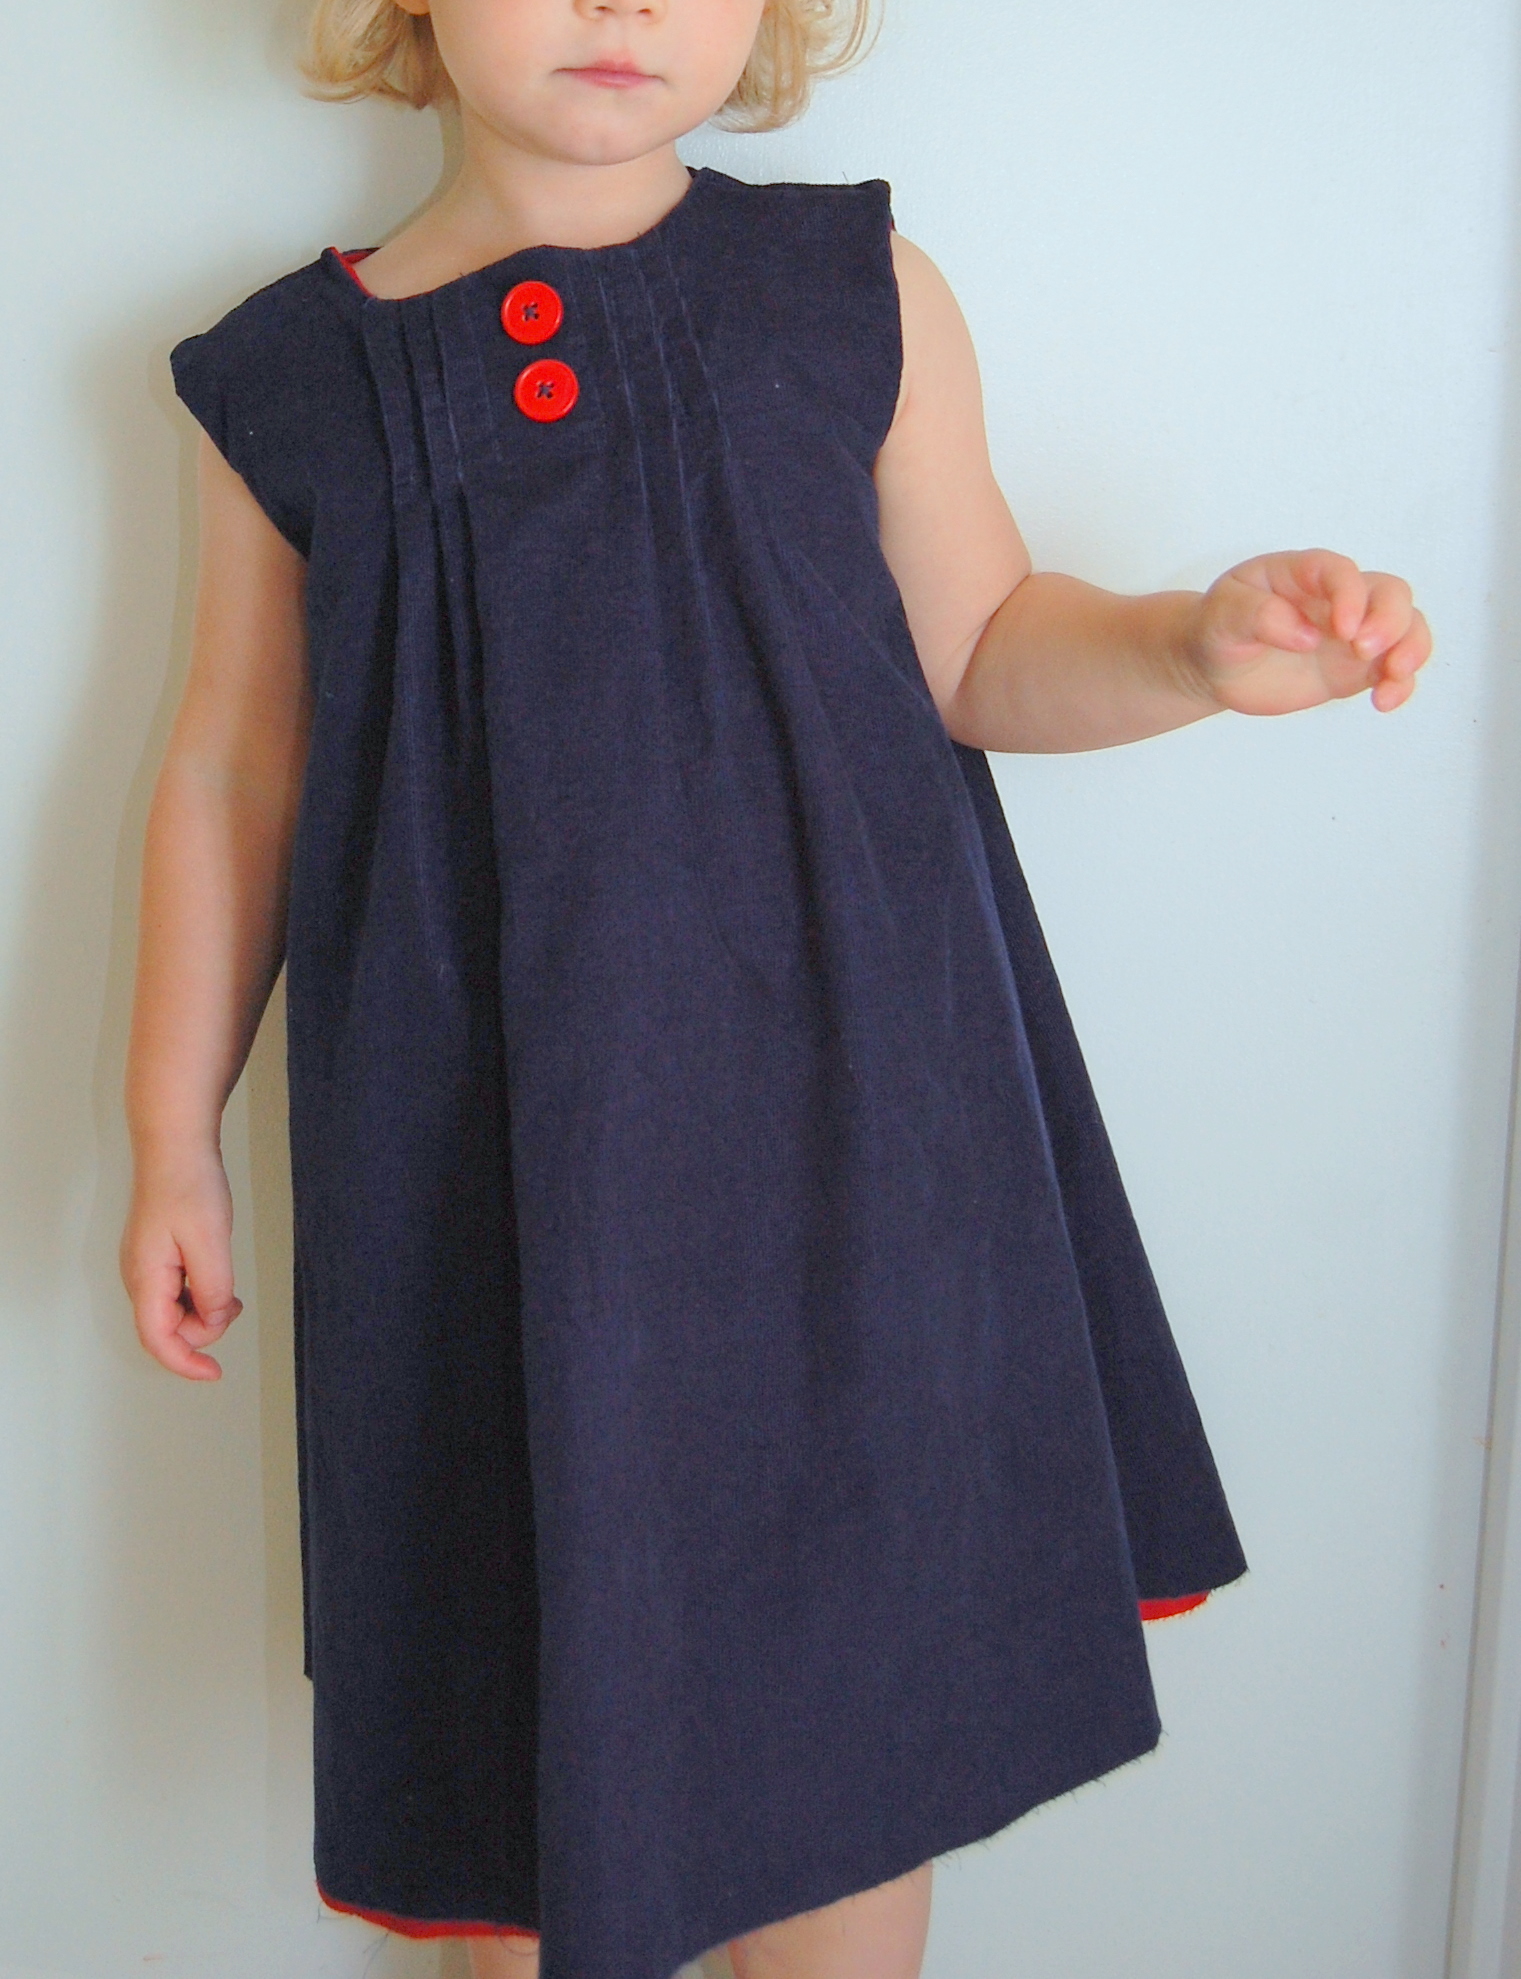 Toddler Girl's Corduroy Dress – Sewing Projects | BurdaStyle.com